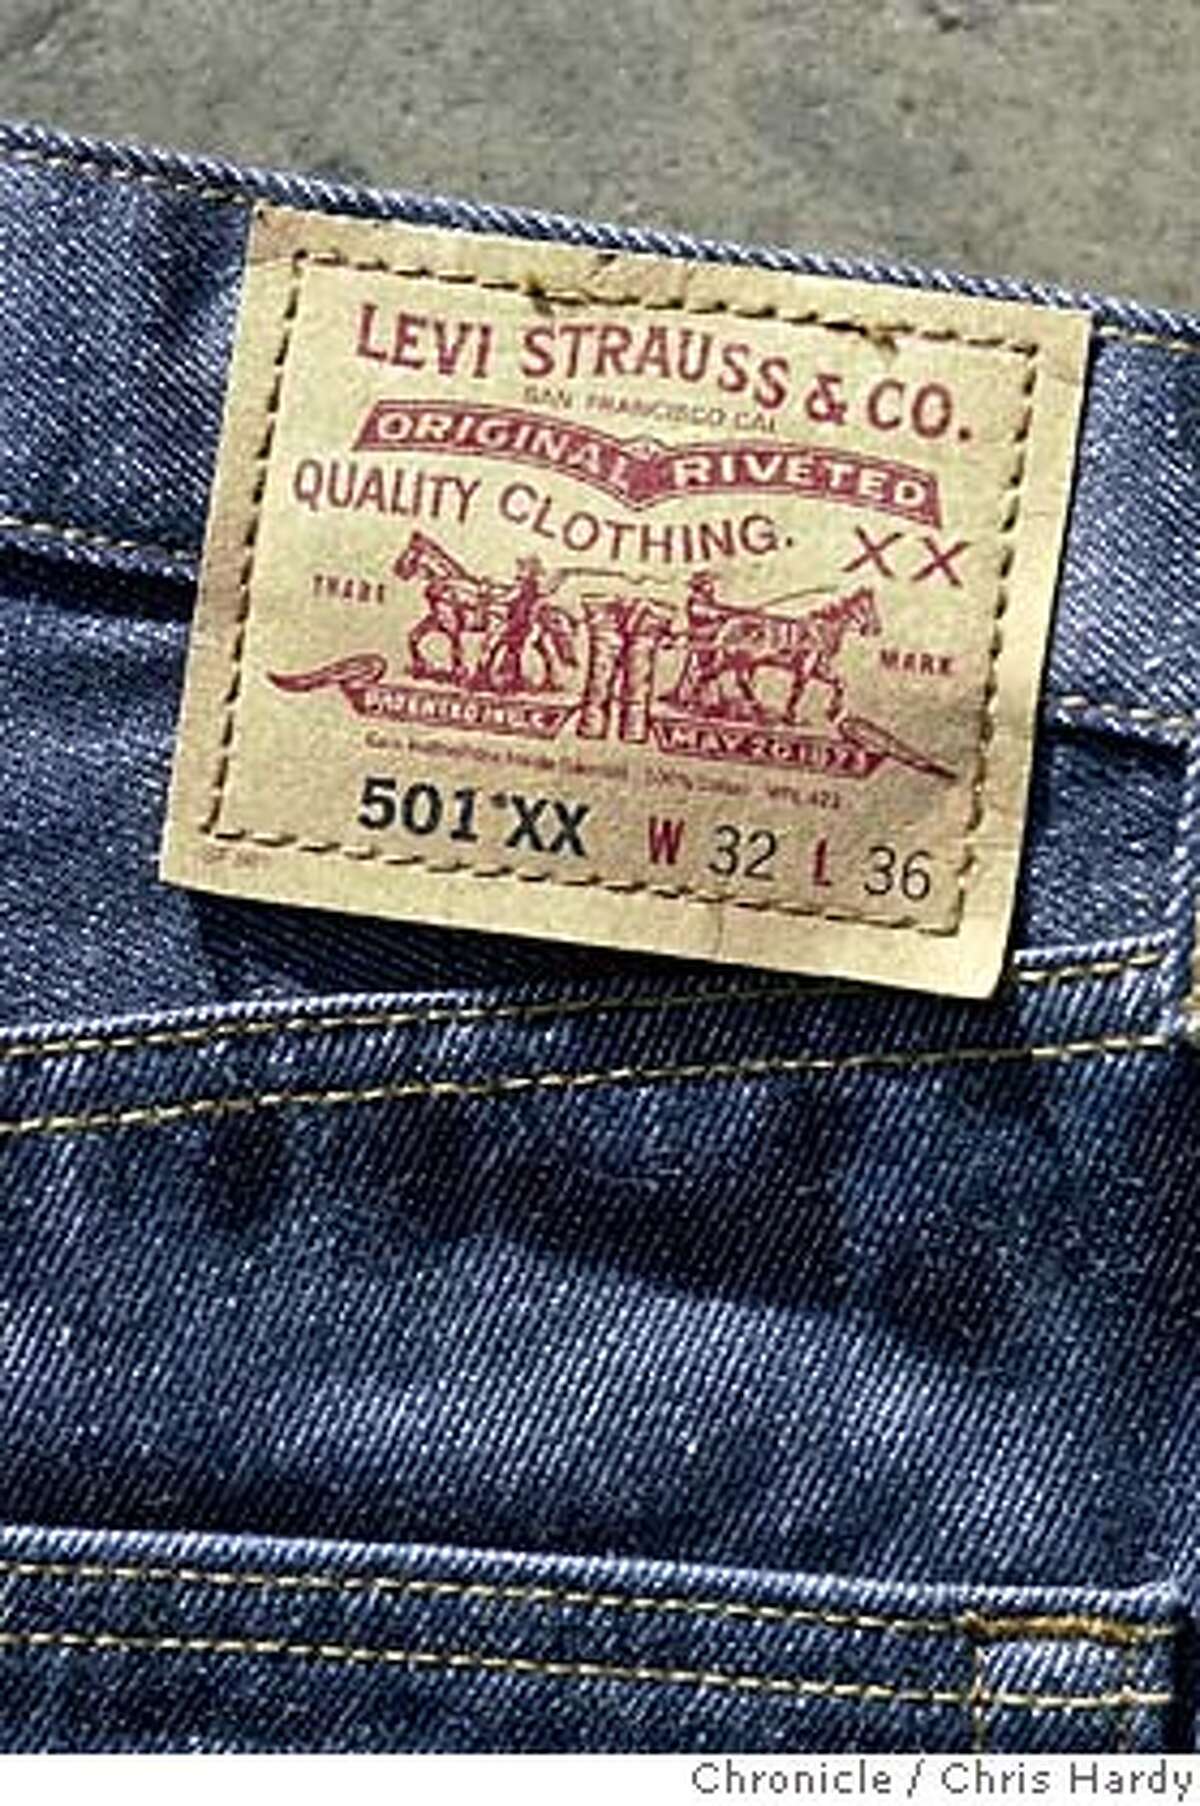 Levi Strauss halts slide with profit in 1st quarter / Higher sales credited  for boosting earnings to $ million